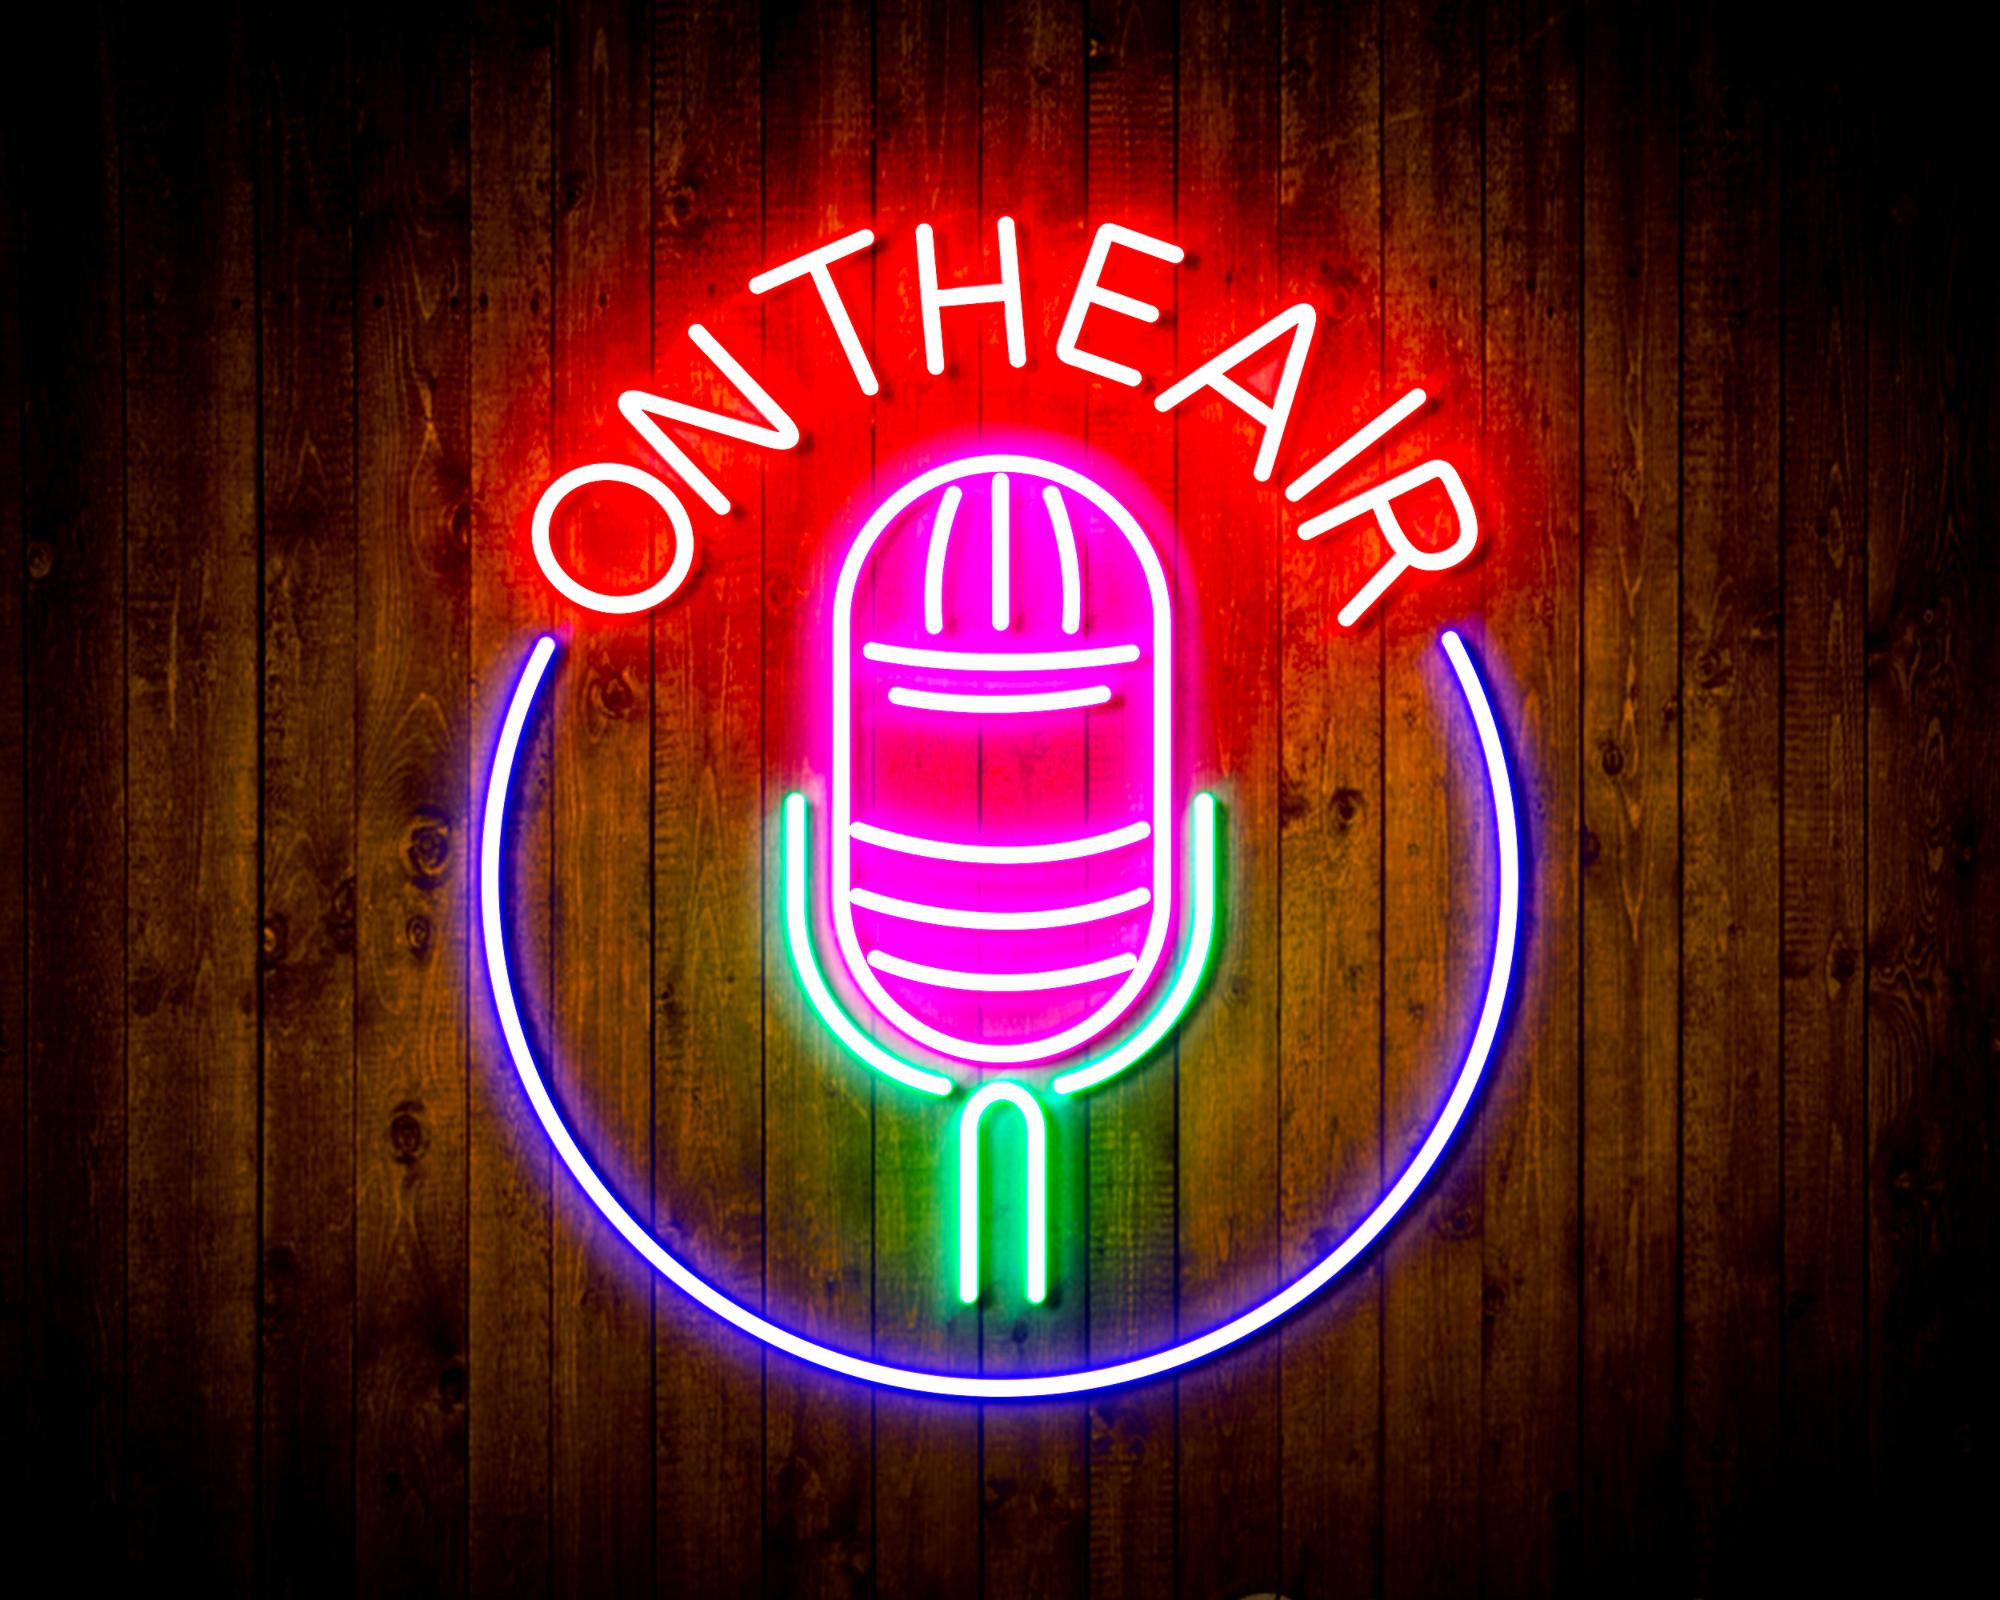 On the Air Microphone LED Neon Sign Wall Light